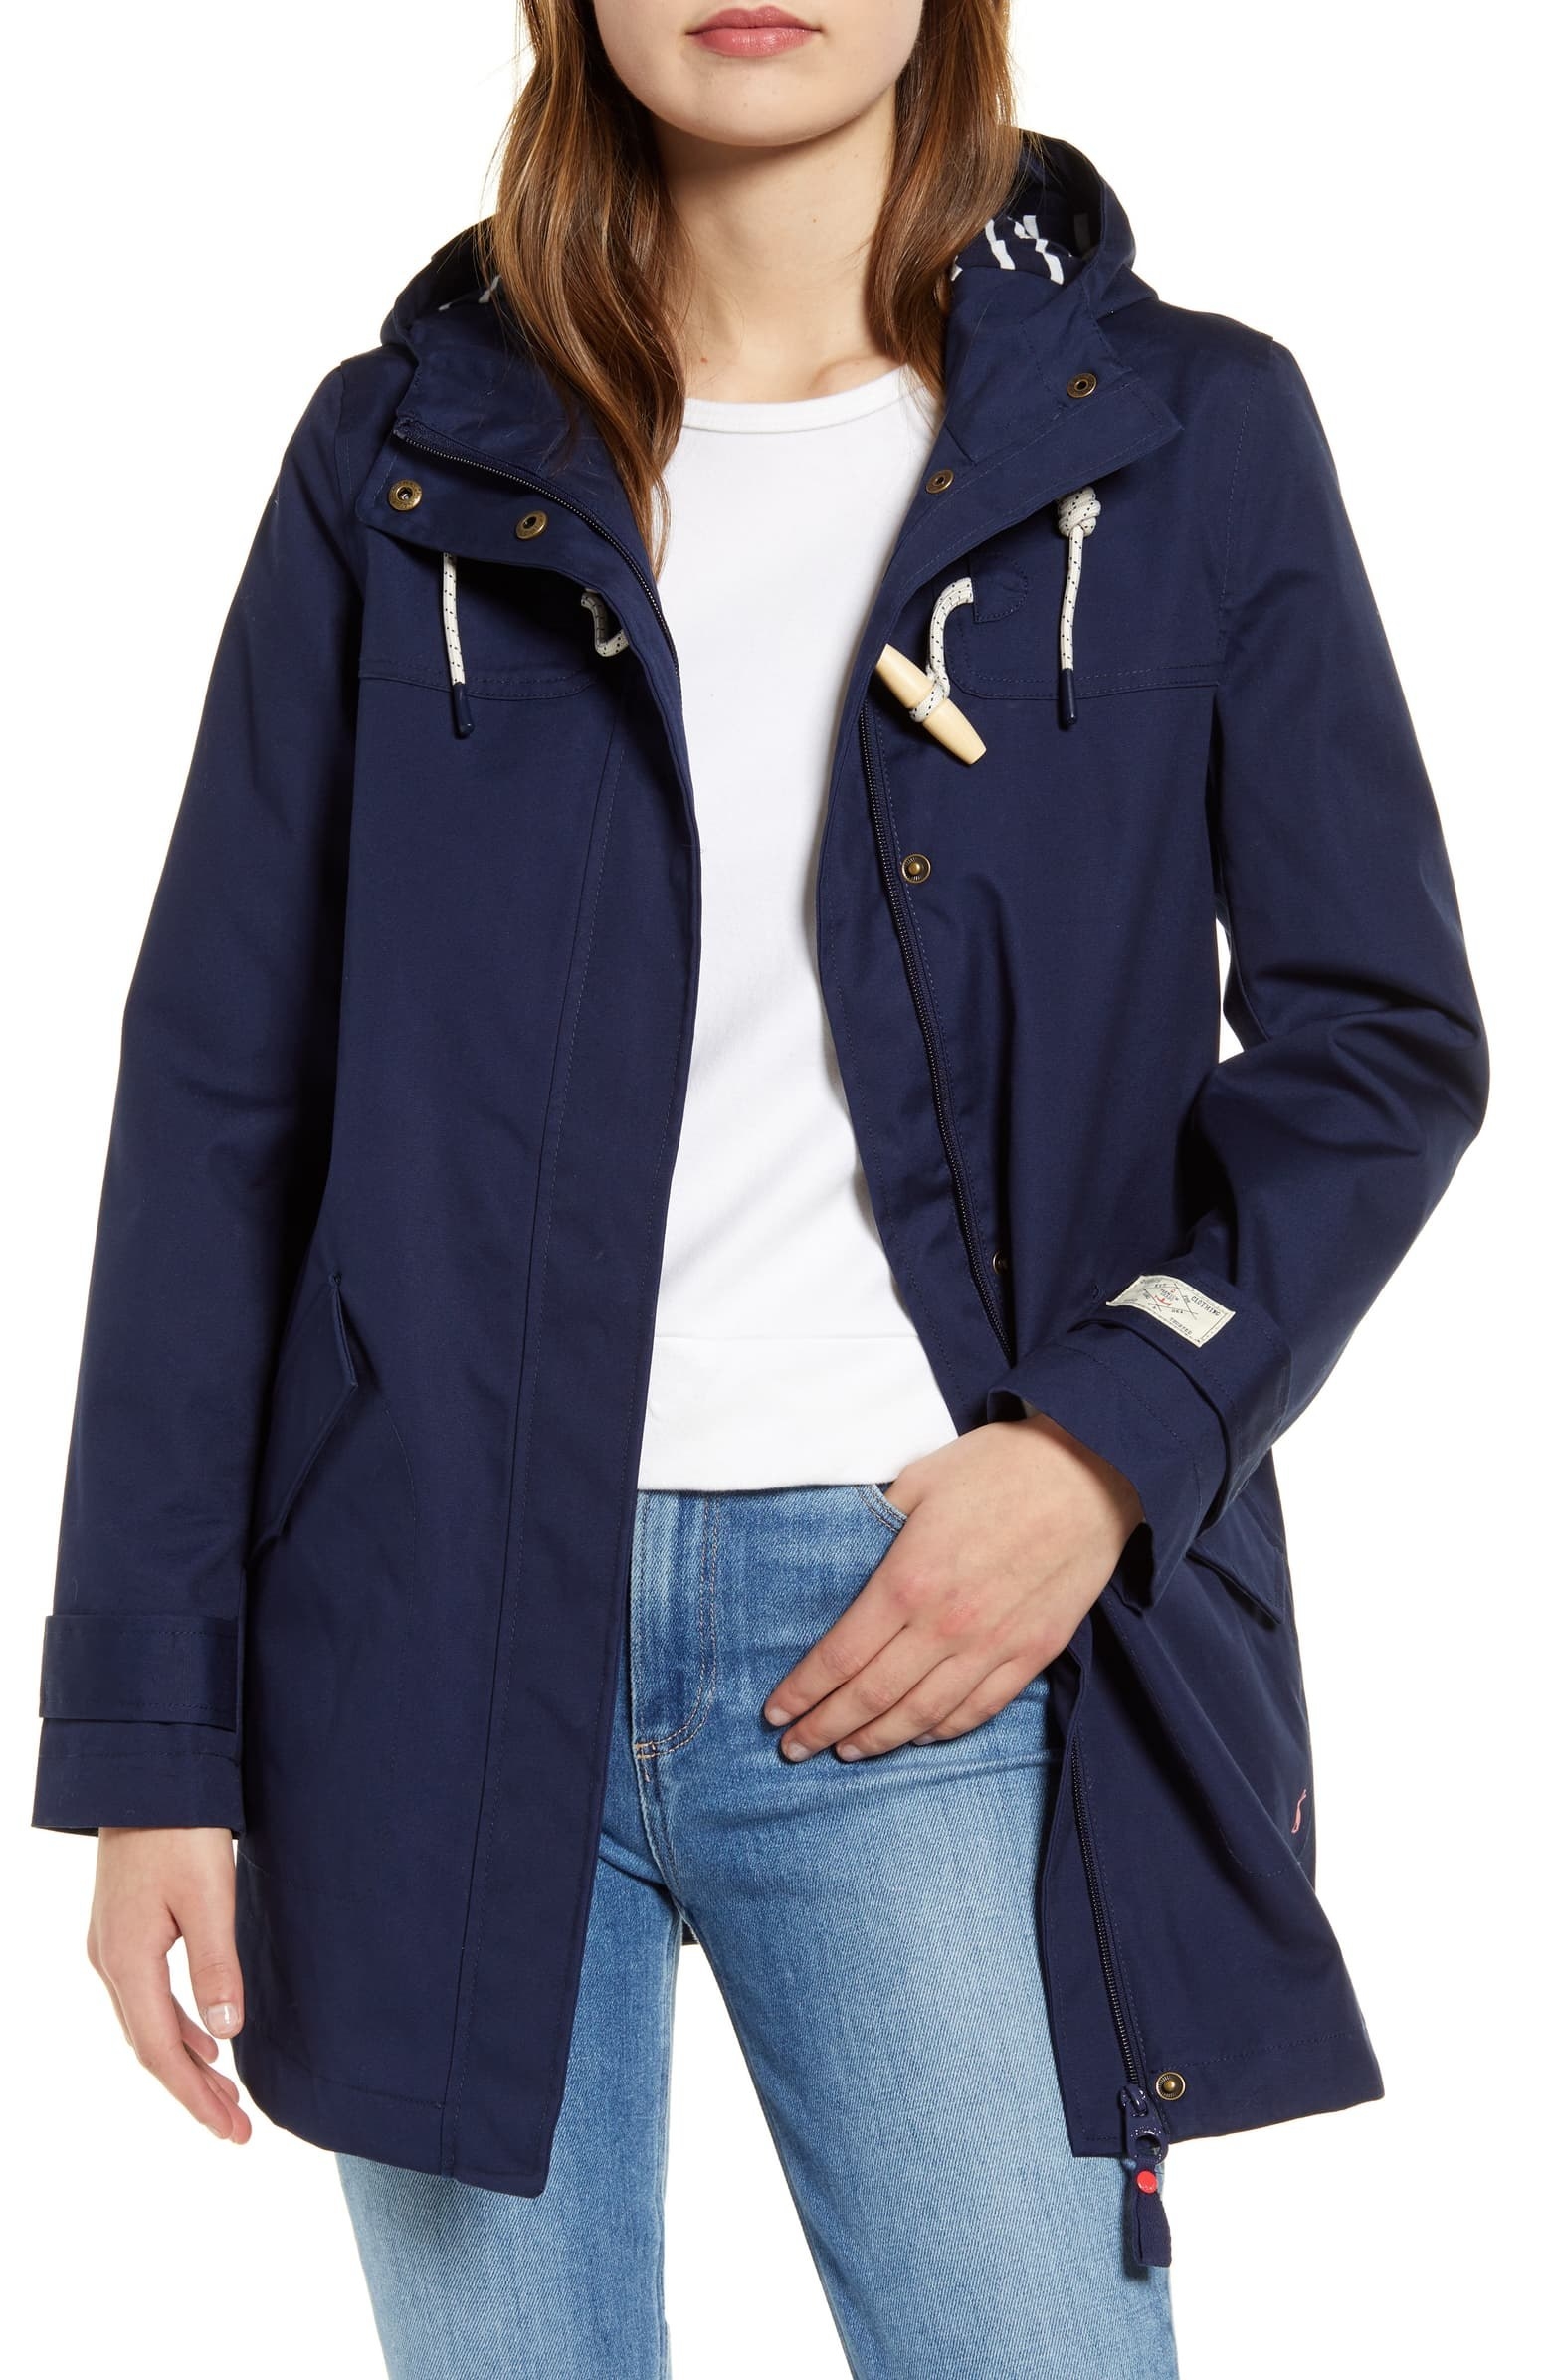 23 Light Jackets That Reviewers Truly Love